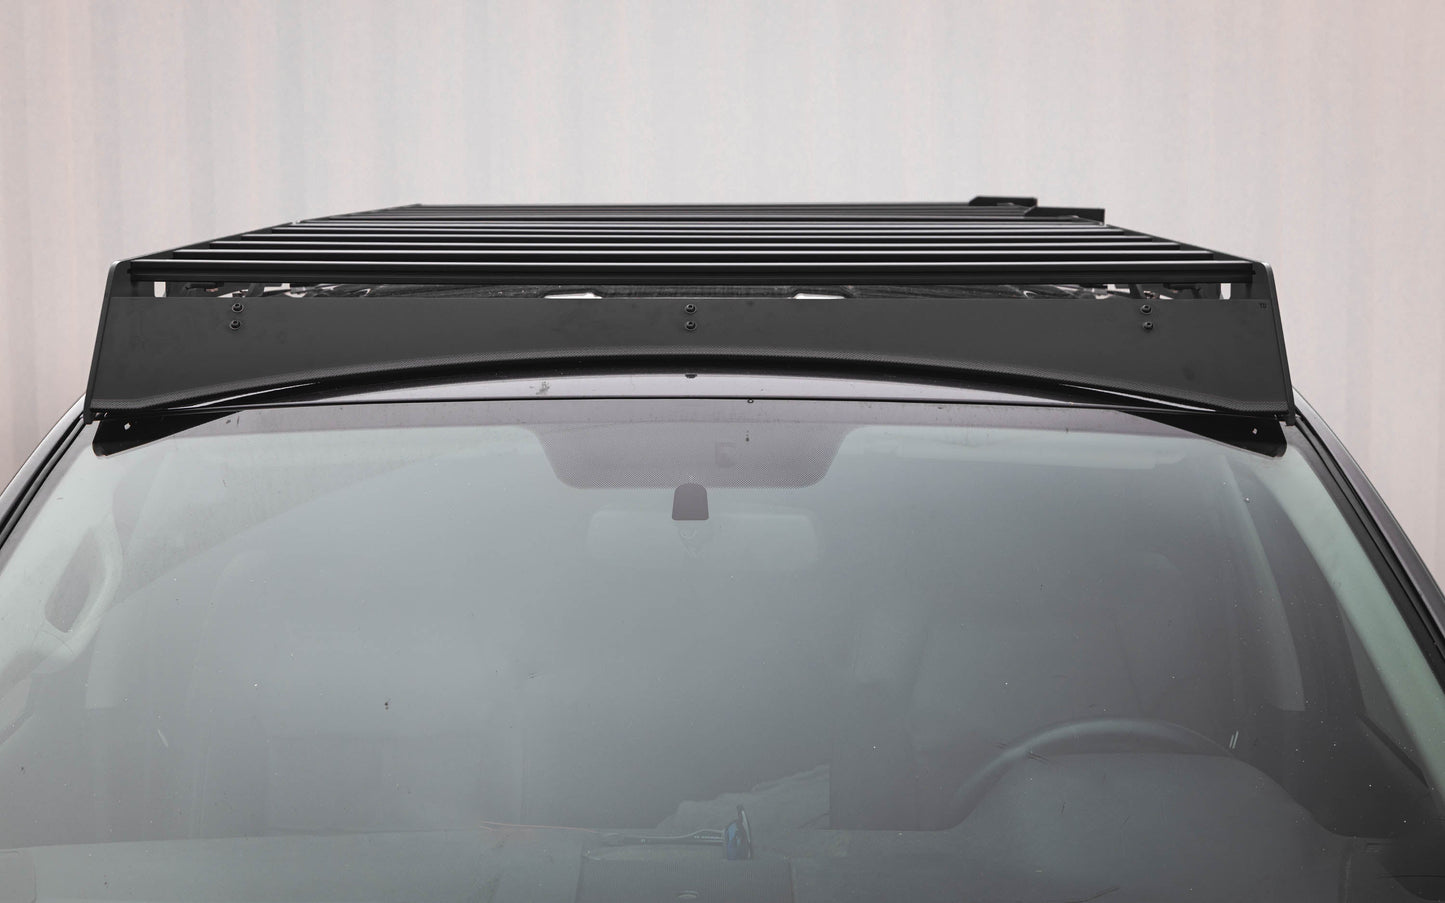 Sherpa Equipment The Little Bear (2007-2021 Tundra Double Cab Roof Rack) - Mid-Atlantic Off-Roading